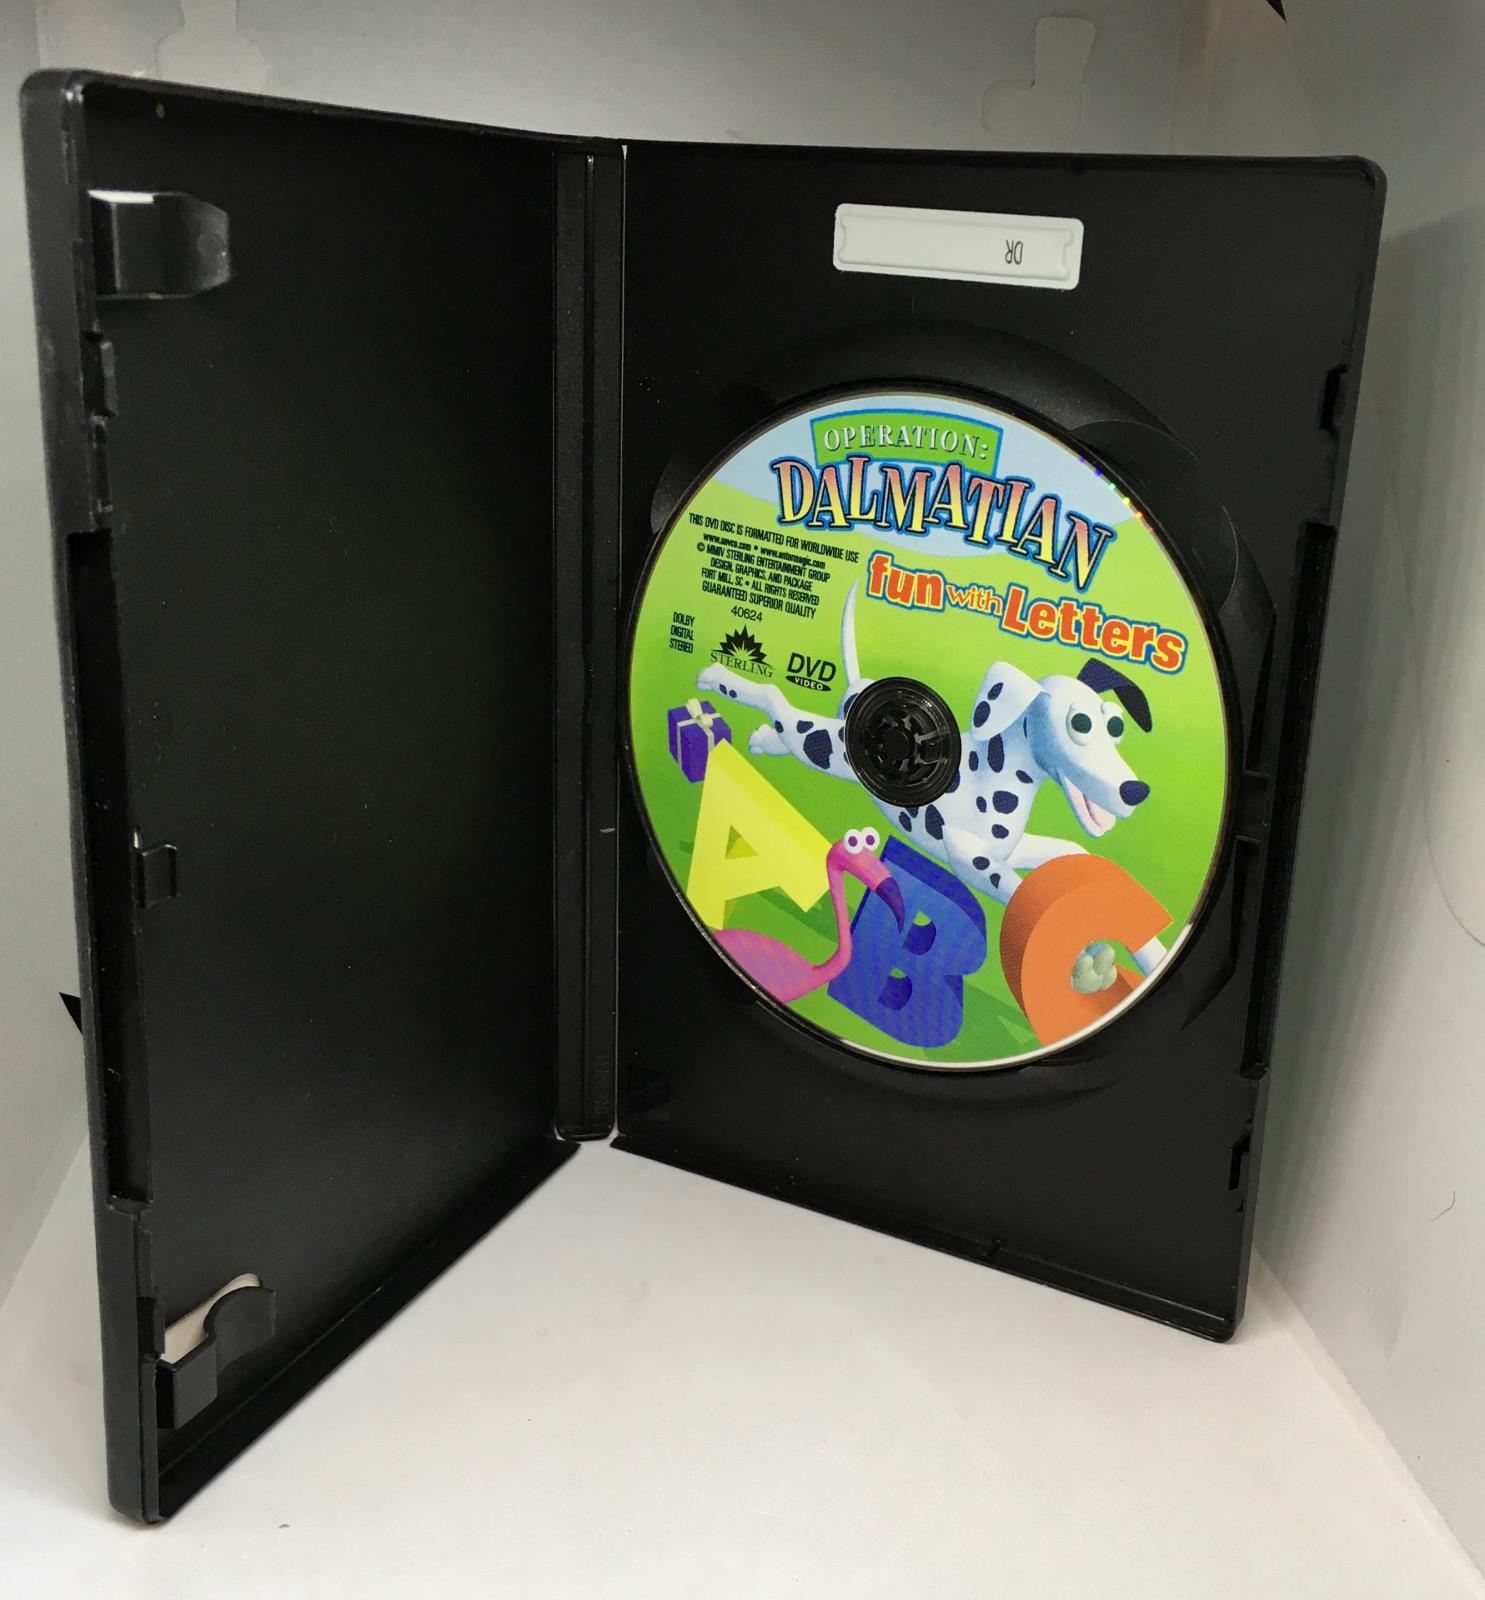 Operation Dalmatian - Fun With Letters (DVD, 2006) 84296406241 | eBay